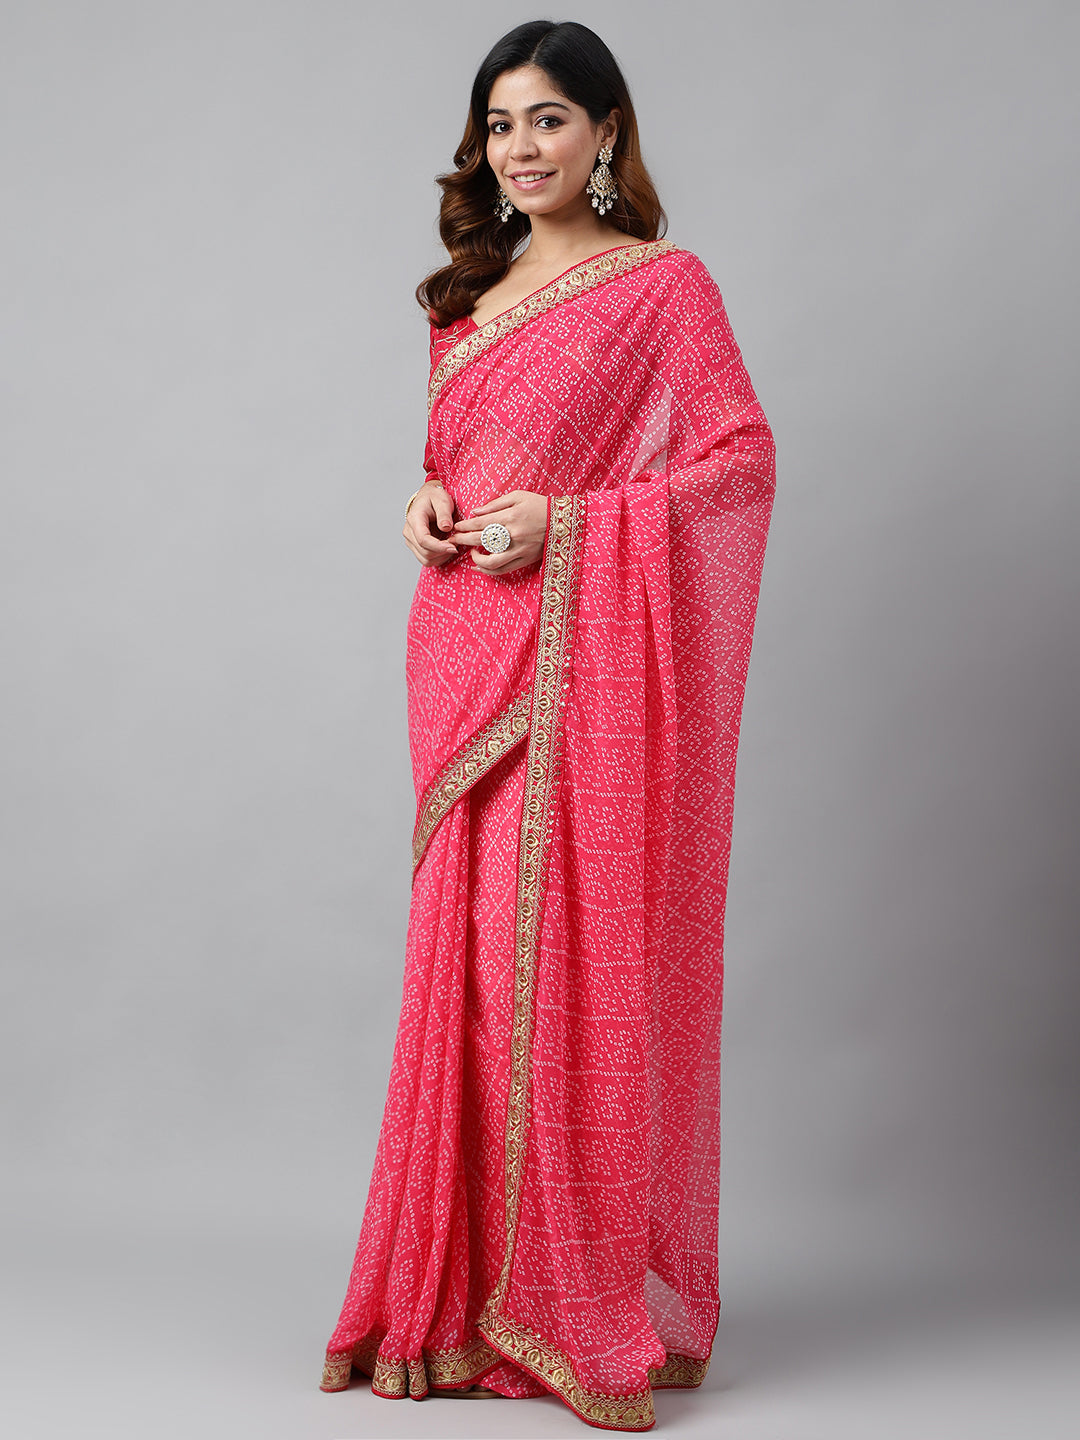 Printed & Embroidery Work In Lace Georgette Pink Bandhani Saree For Women